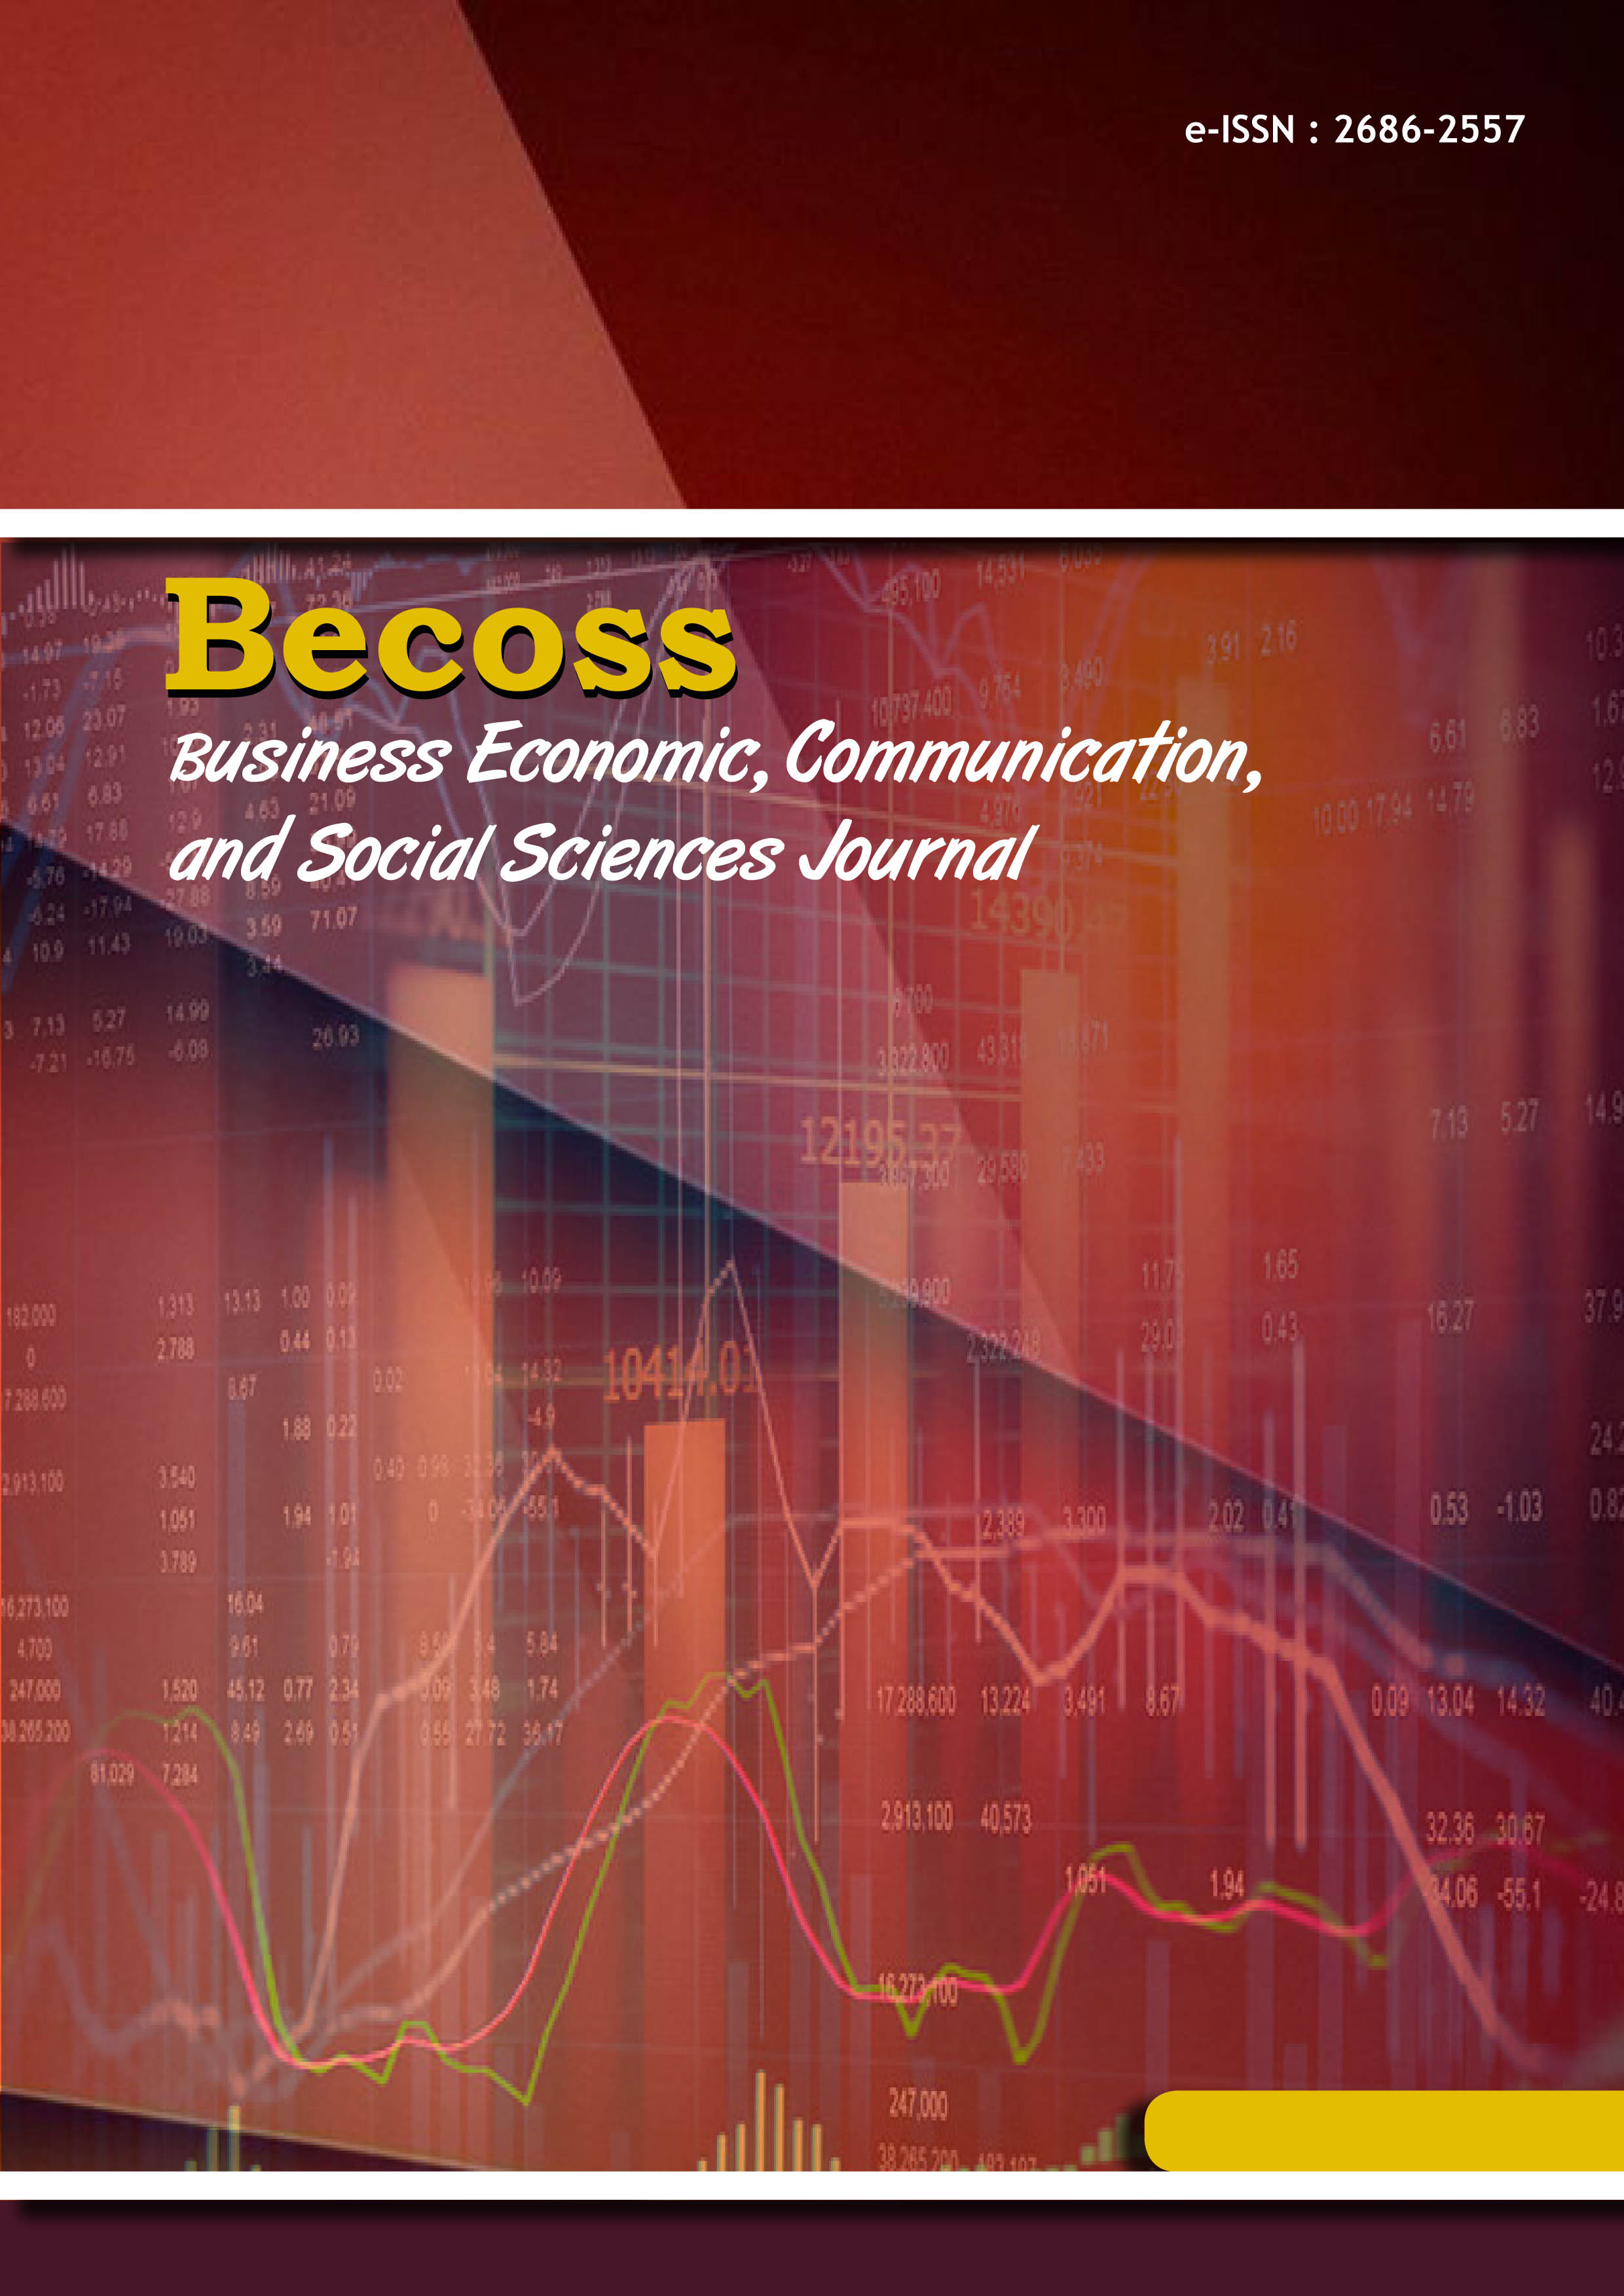 Business Economic, Communication, and Social Sciences (BECOSS) Journal